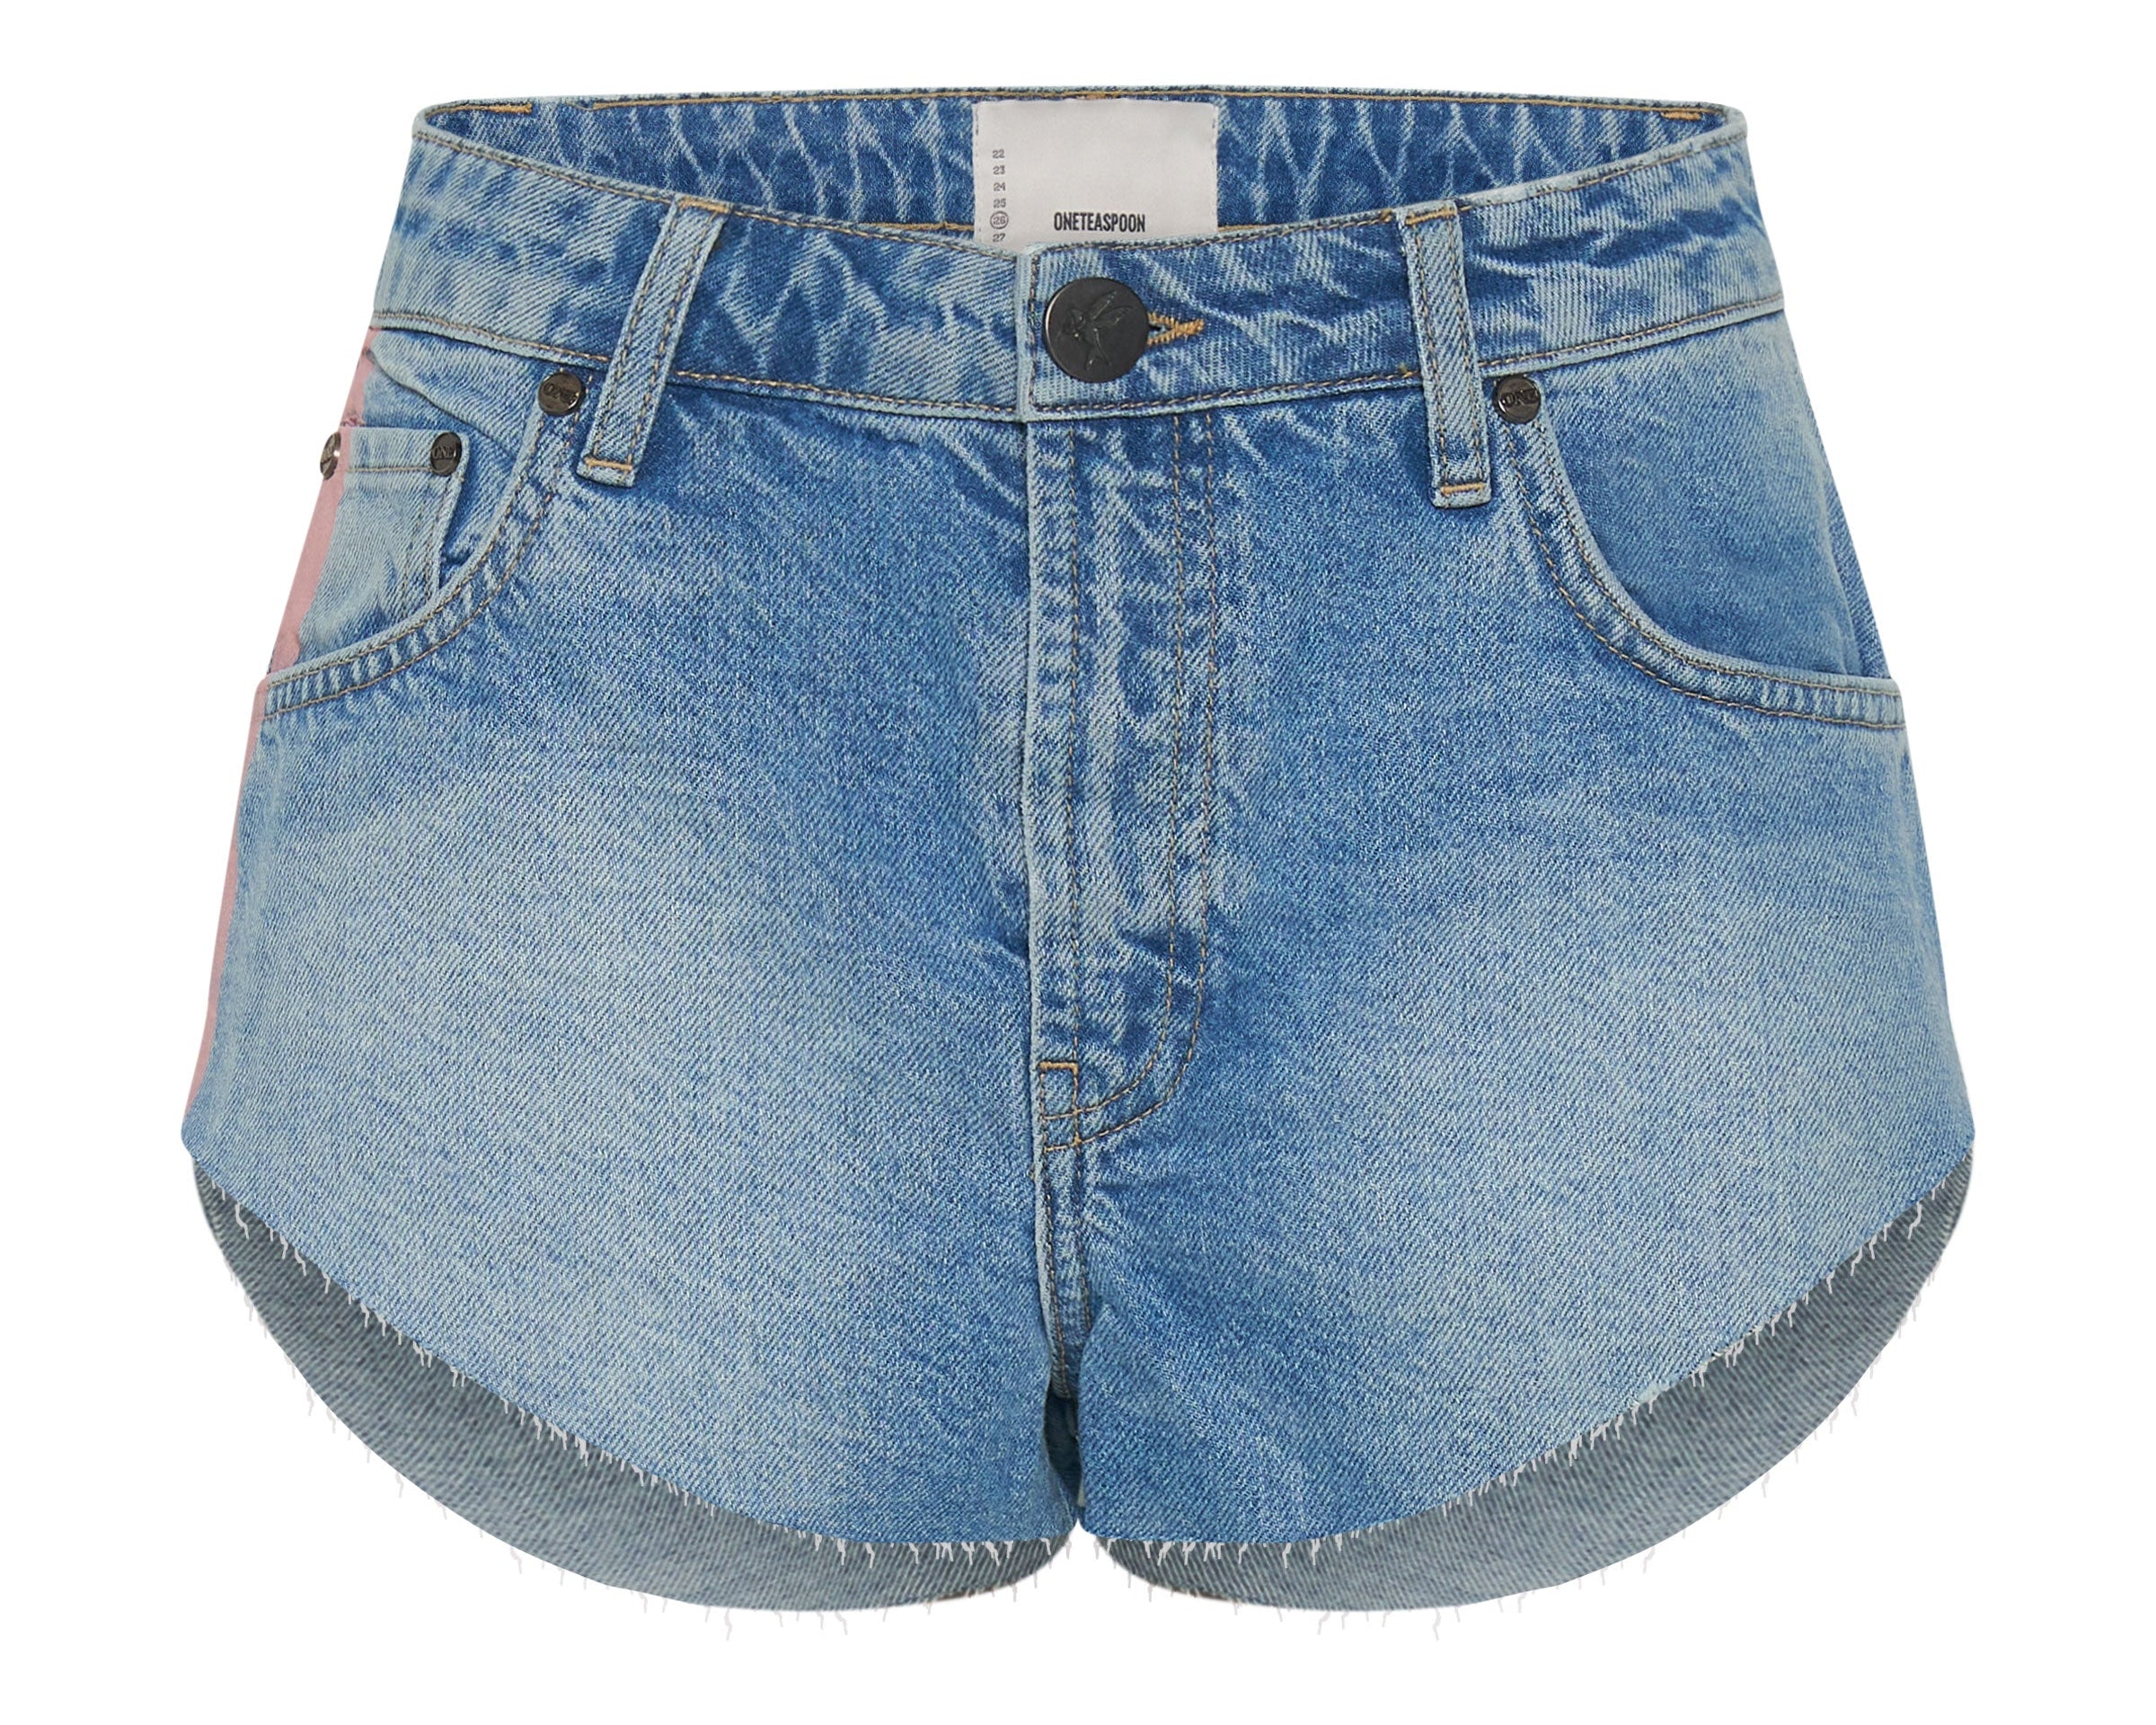 LINEAR BLUE THE ONE FITTED CHEEKY DENIM SHORTS